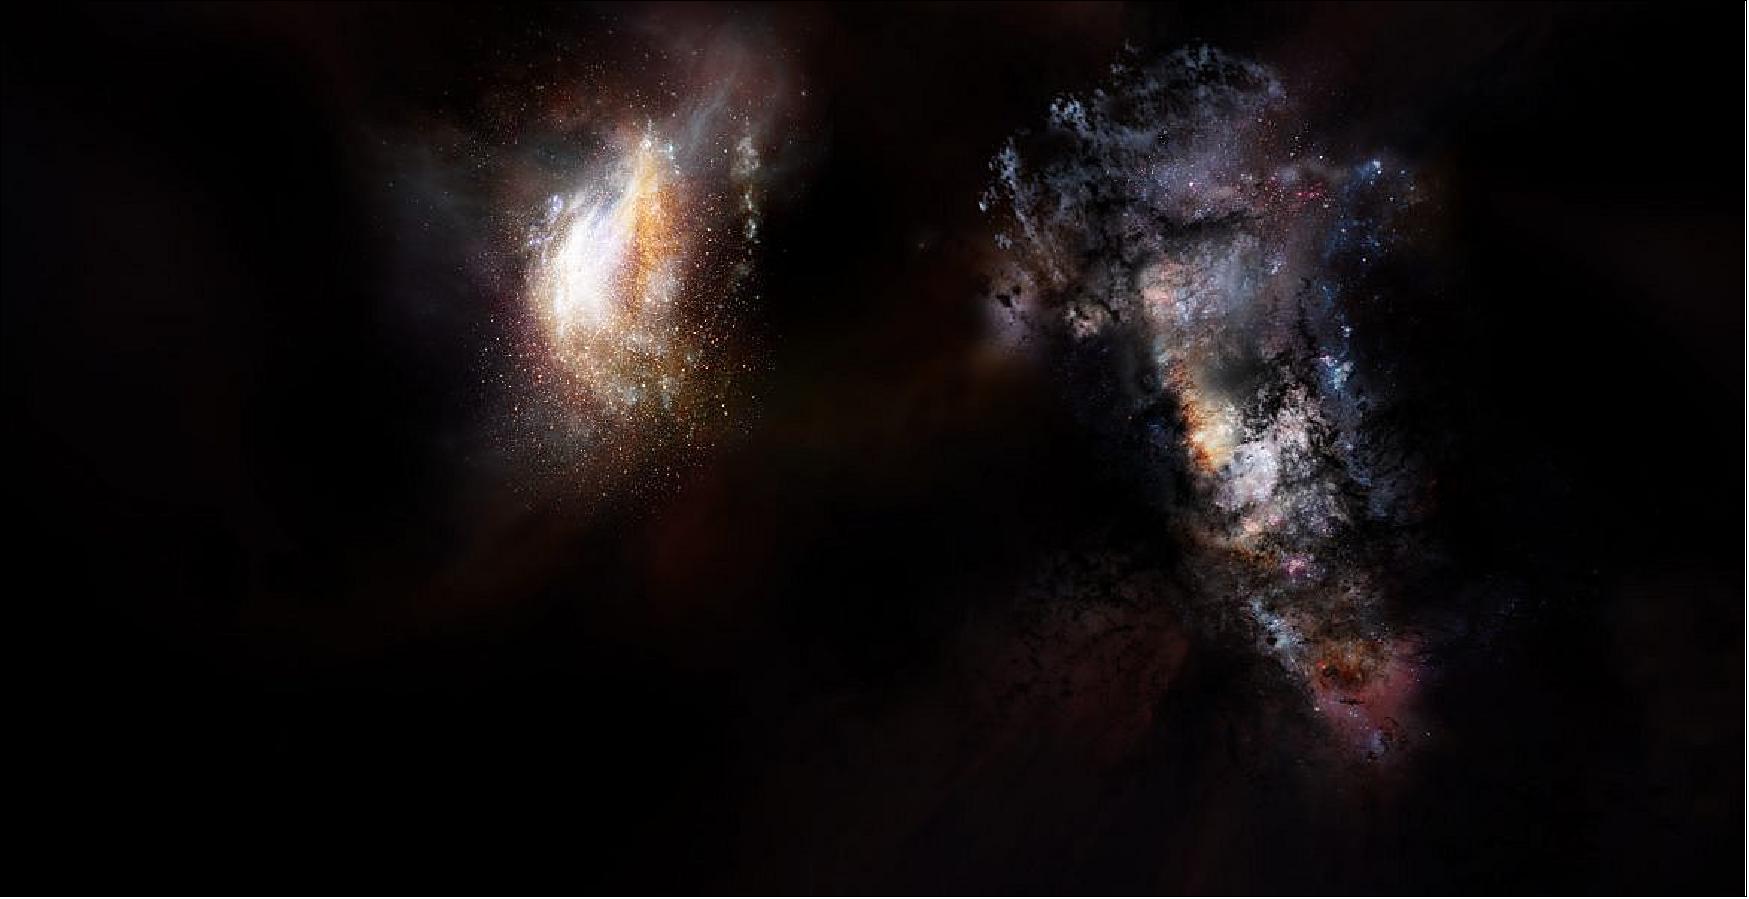 Figure 63: Artist impression of a pair of galaxies from the very early universe (image credit: NRAO/AUI/NSF; D. Berry)